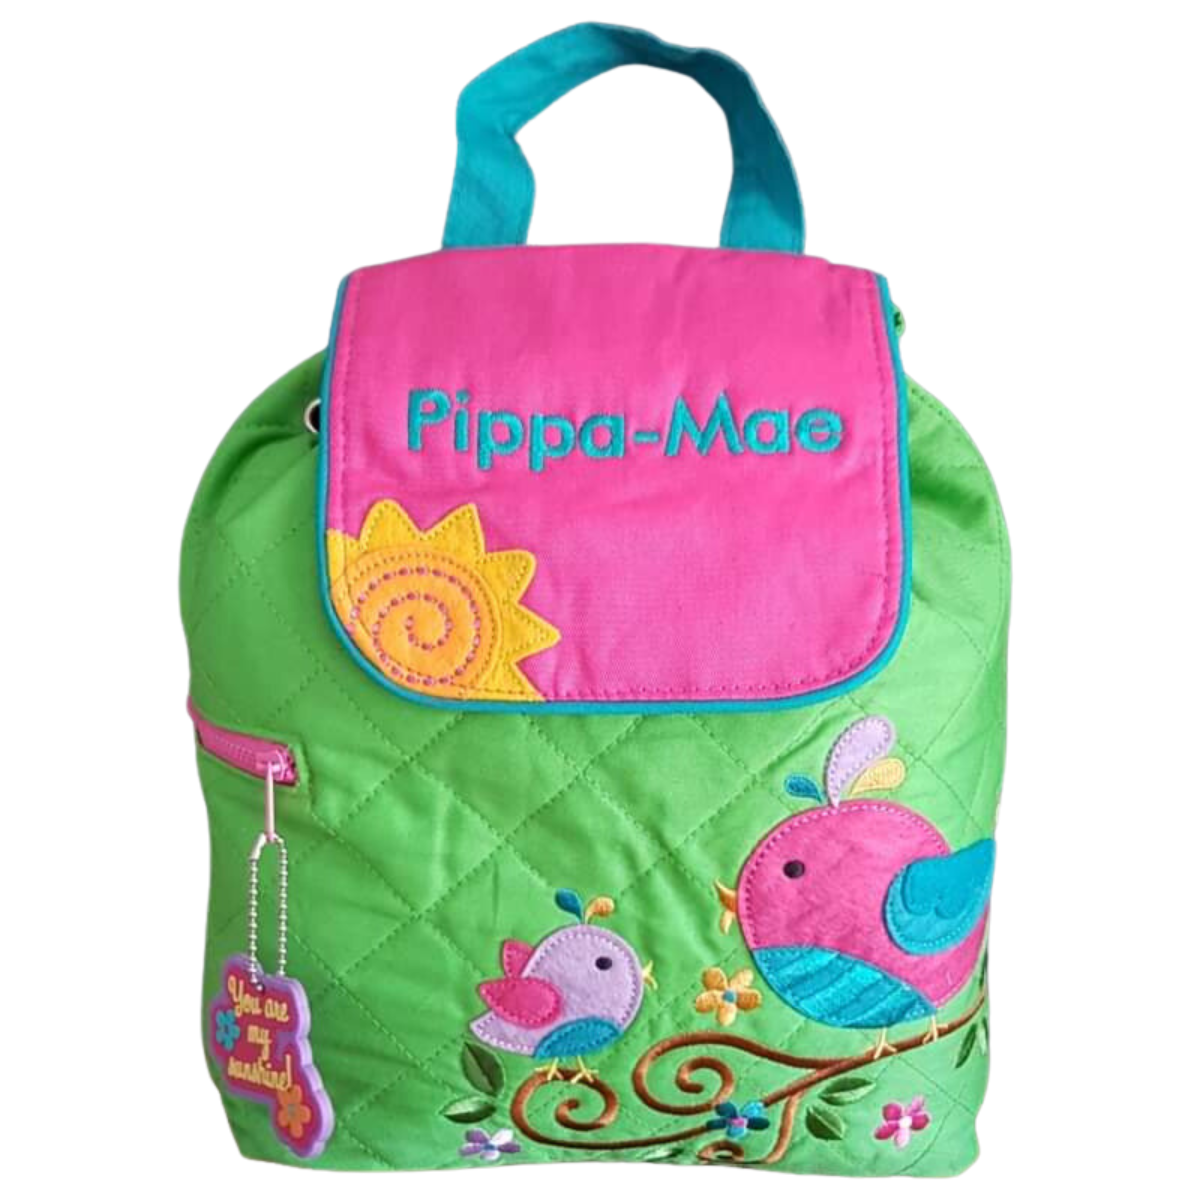 Personalised Stephen Joseph child's backpack made from quilted green fabric with bright bird applique designs. The backpack can be personalised with a name of your choice which will be embroidered onto the bag opening.